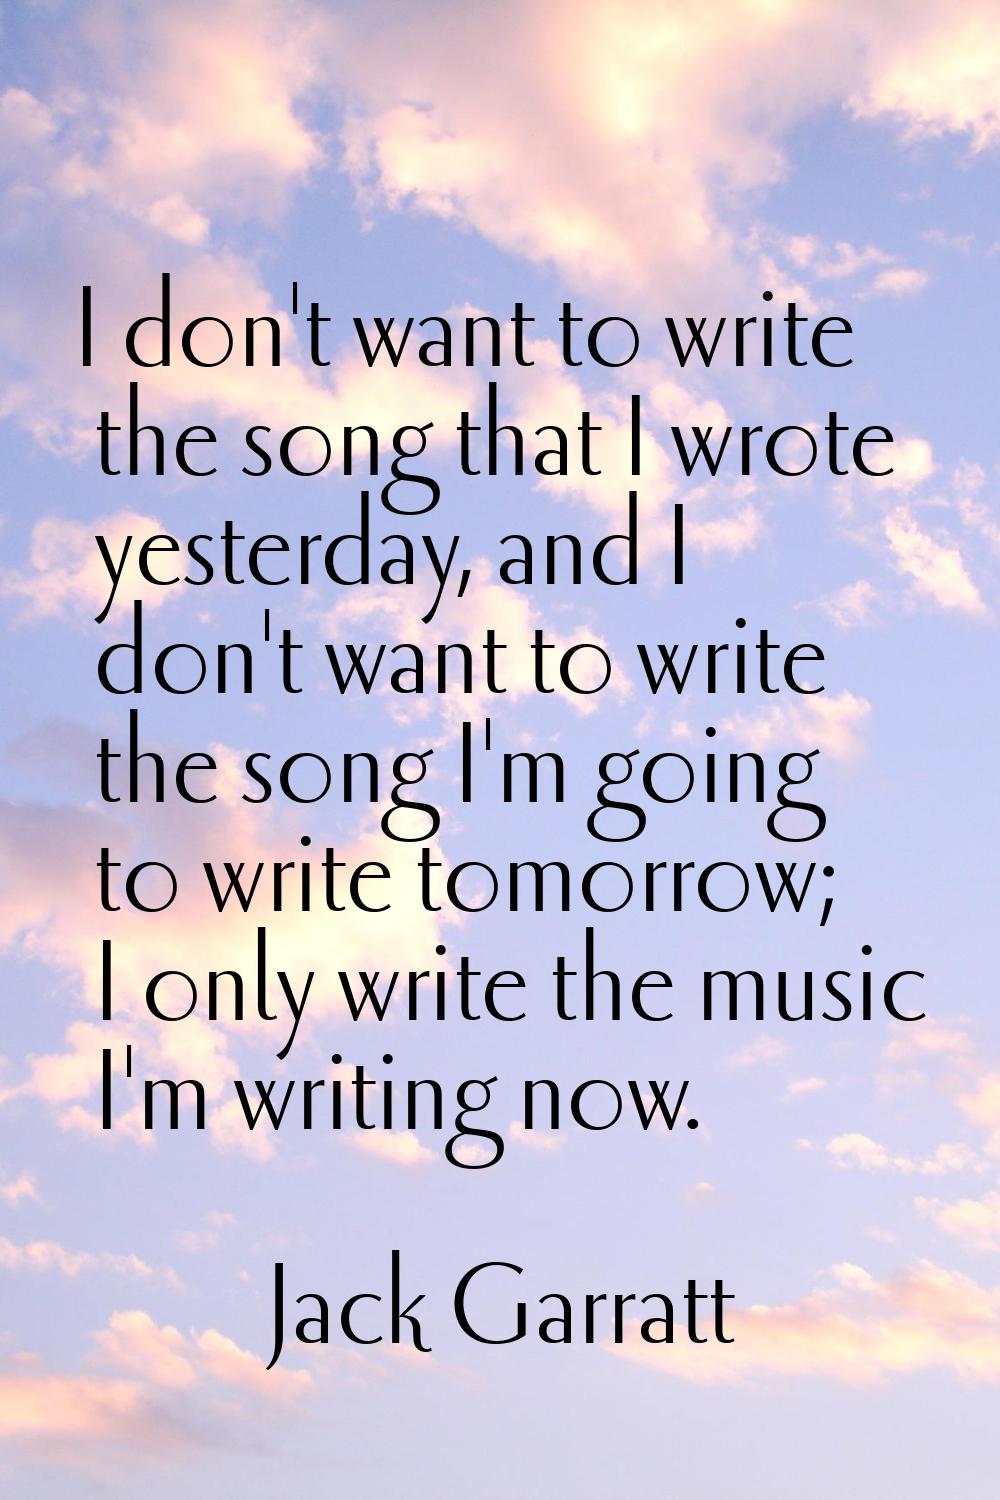 I don't want to write the song that I wrote yesterday, and I don't want to write the song I'm going